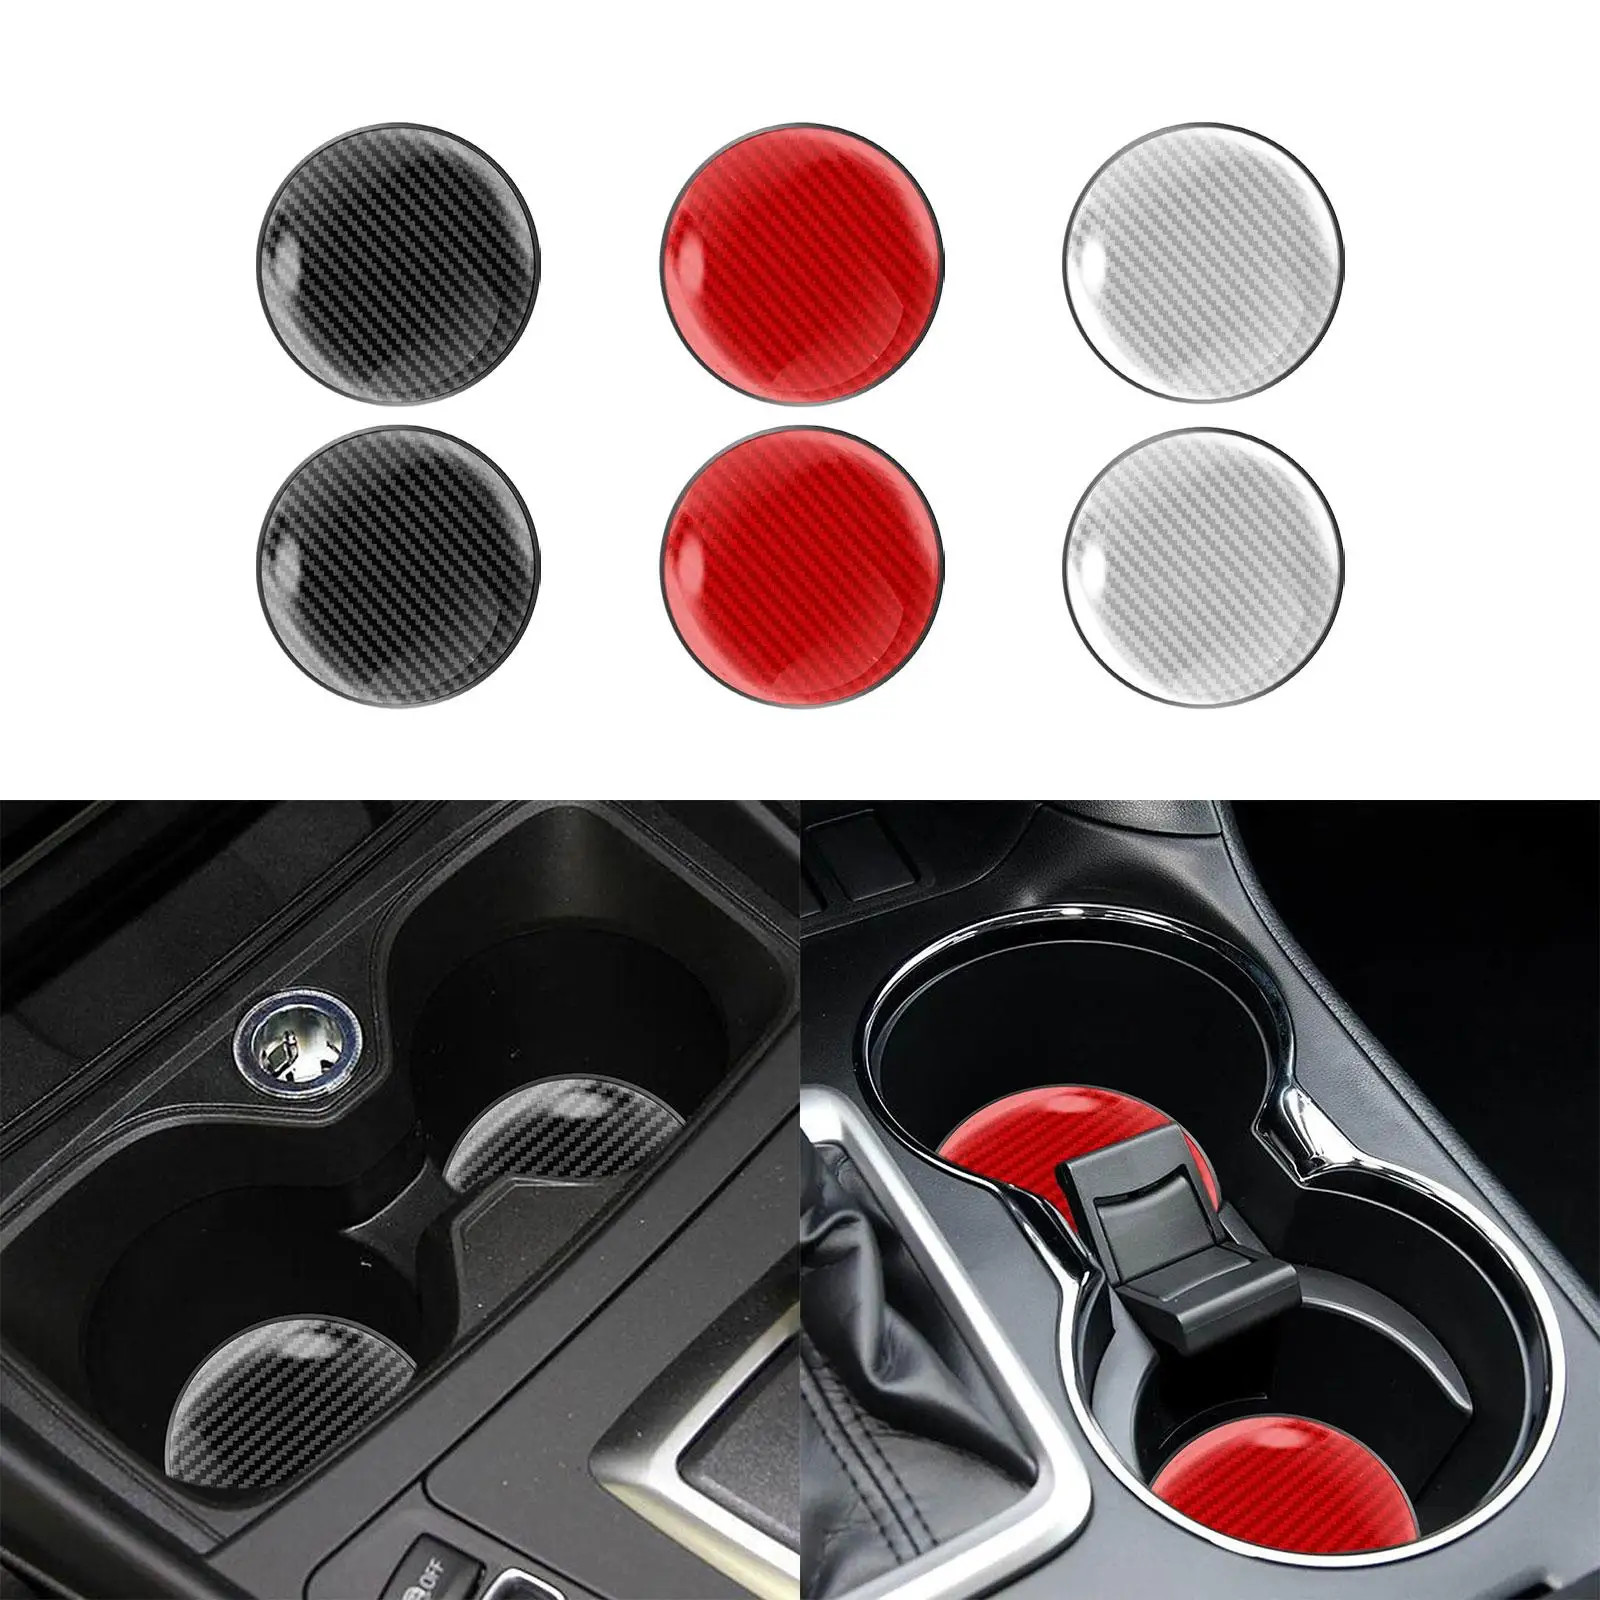 2Pcs Cup Holder Coaster Teacup Protector Car Accessory Drink Mat Vehicle Car Coasters Insert for Travel Outdoor Most Cars